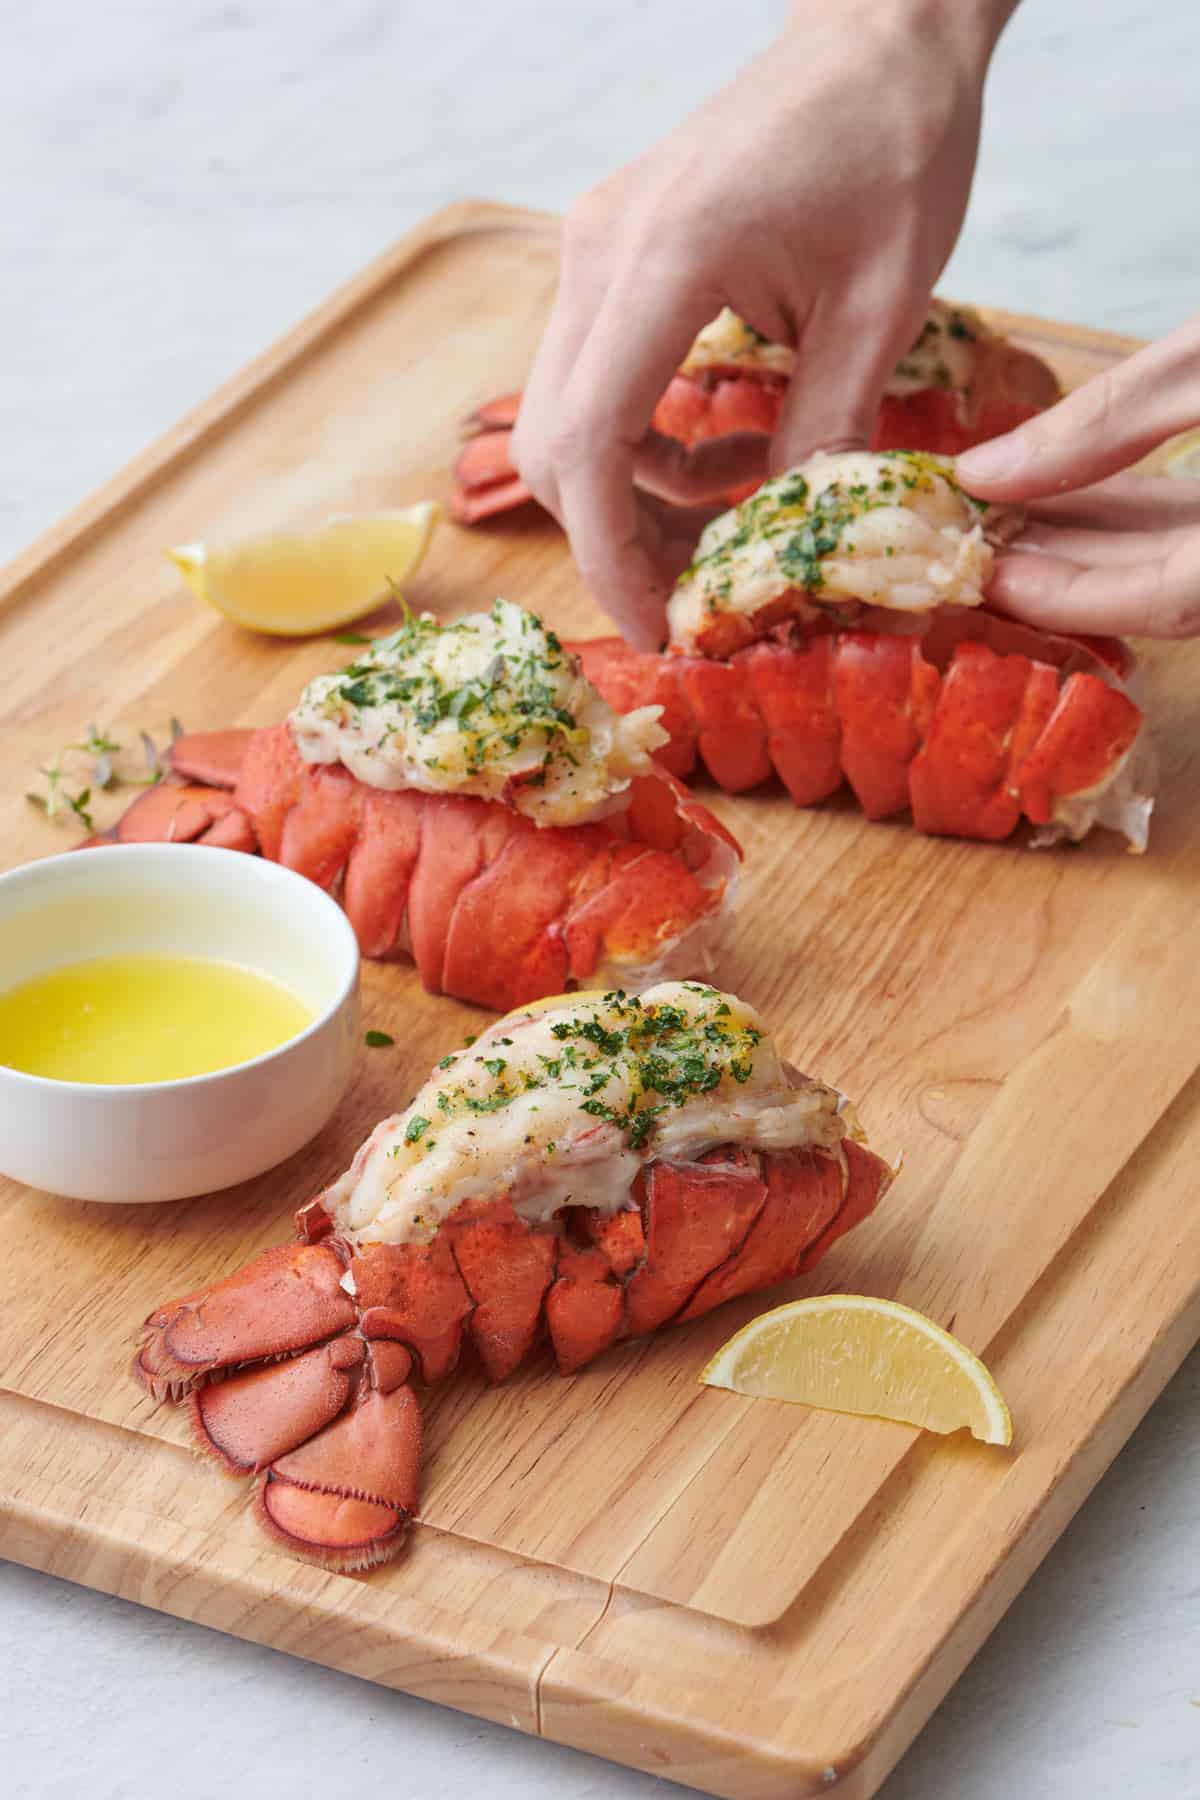 Lobster tails on a cutting board with a hand lifting up the meat from one.